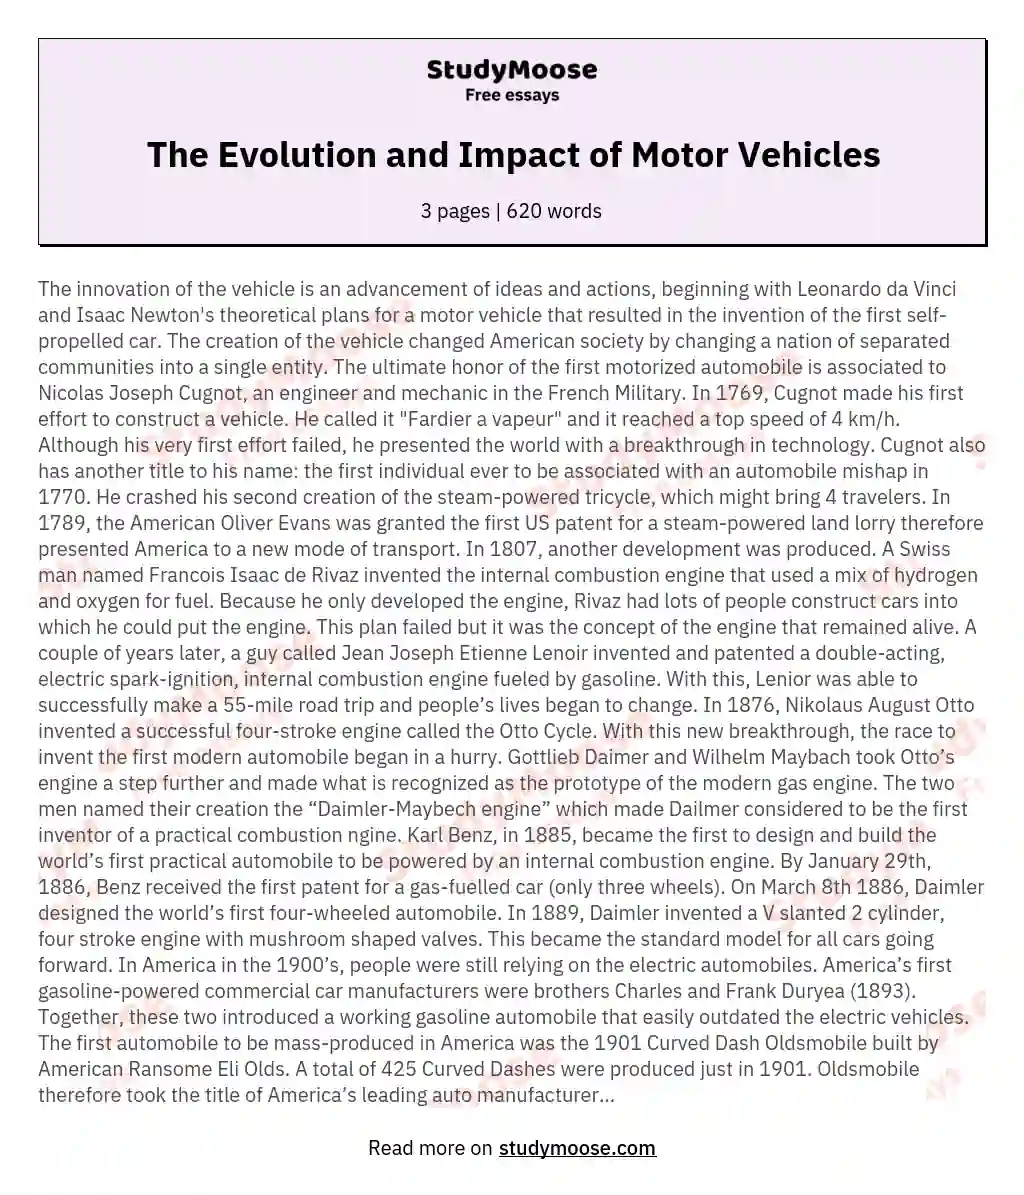 The Evolution and Impact of Motor Vehicles essay